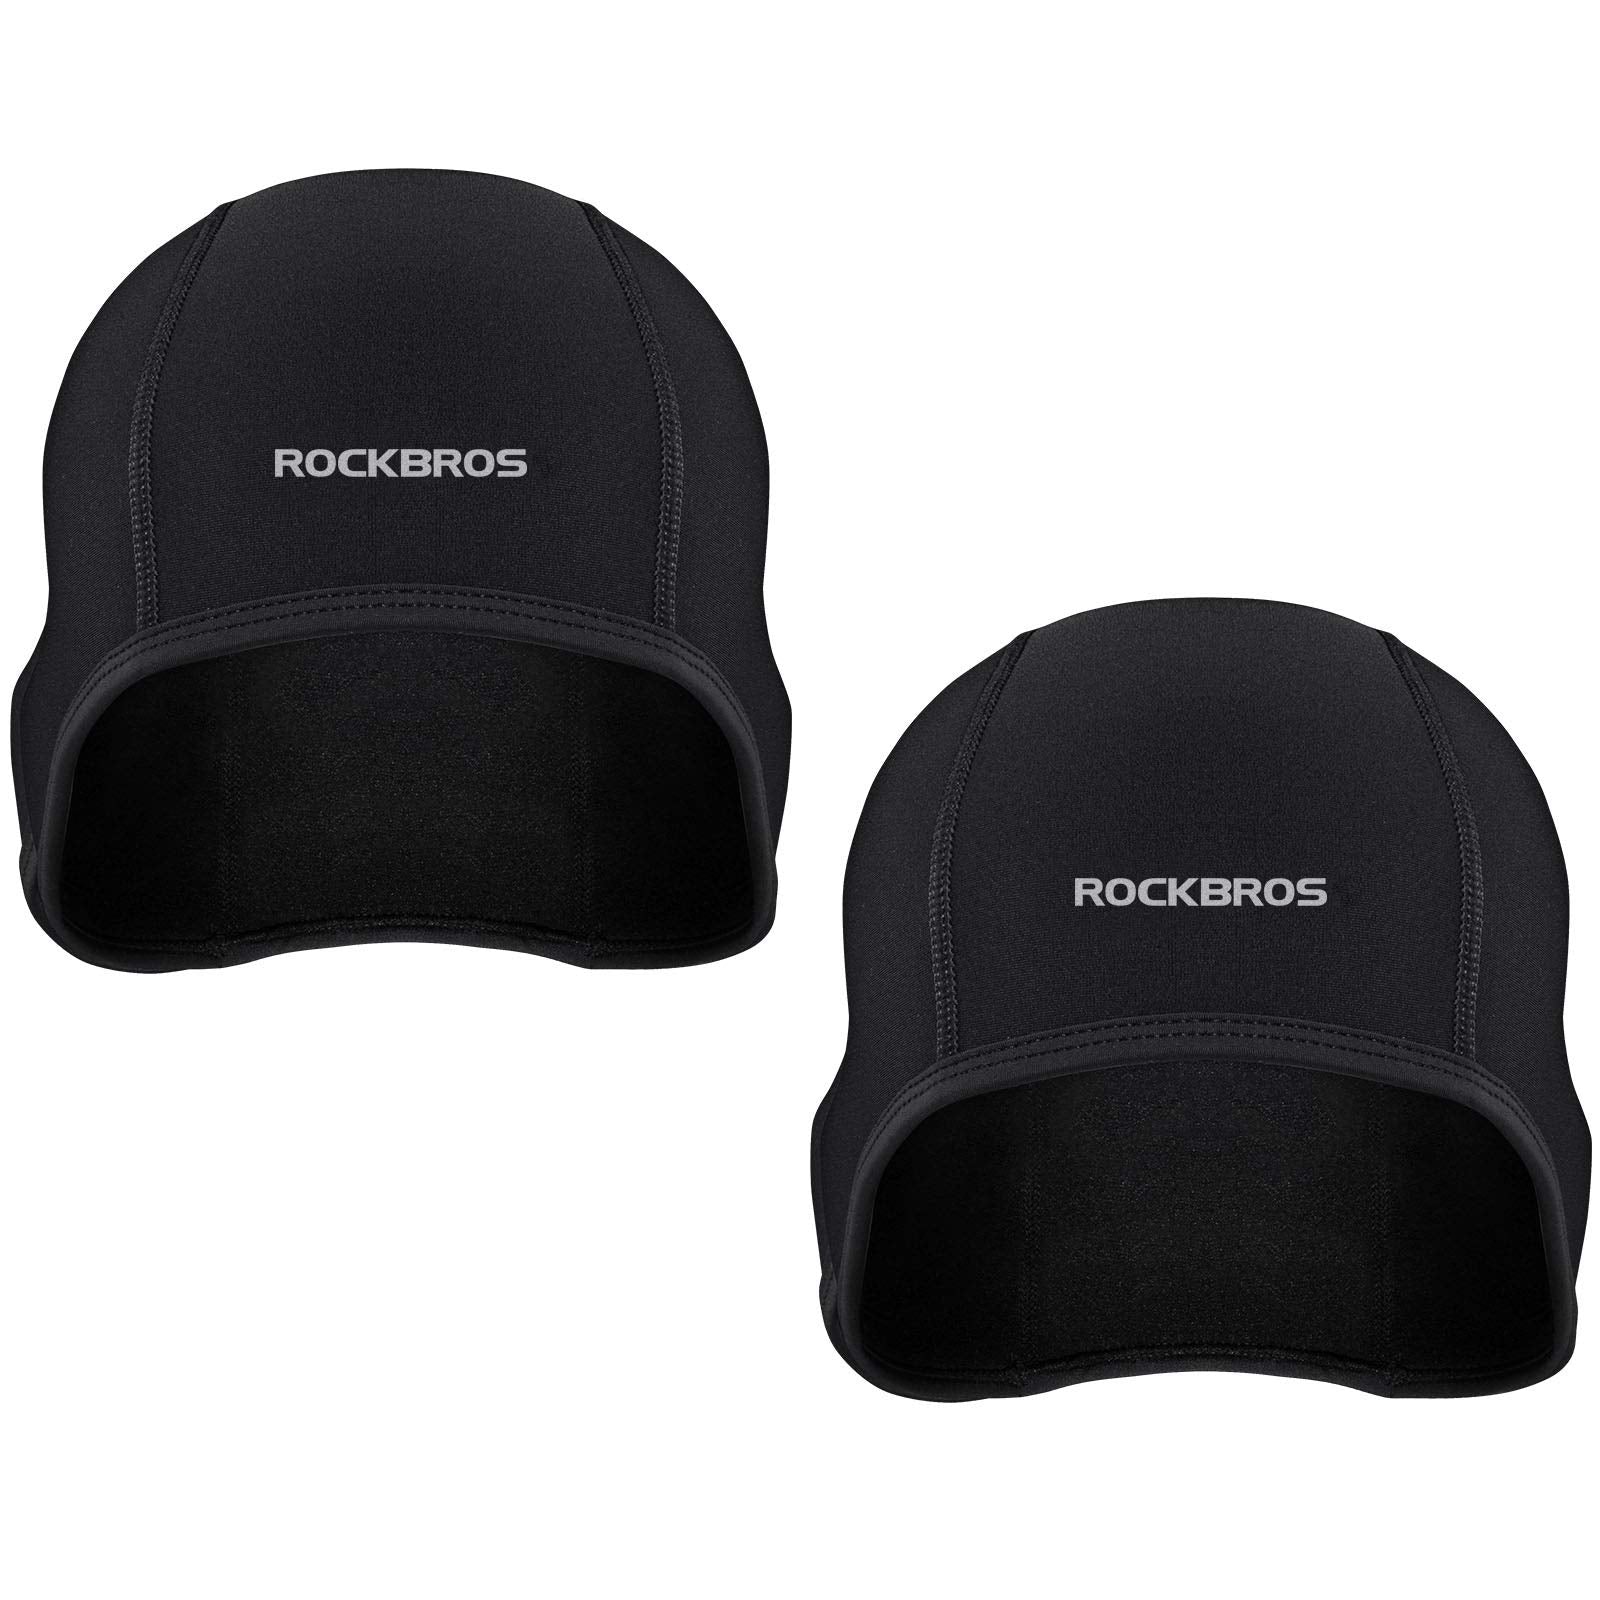 ROCKBROS Sports Beanie Skull Cap Helmet Liner Hats with Ear Covers #Style_2 PCS